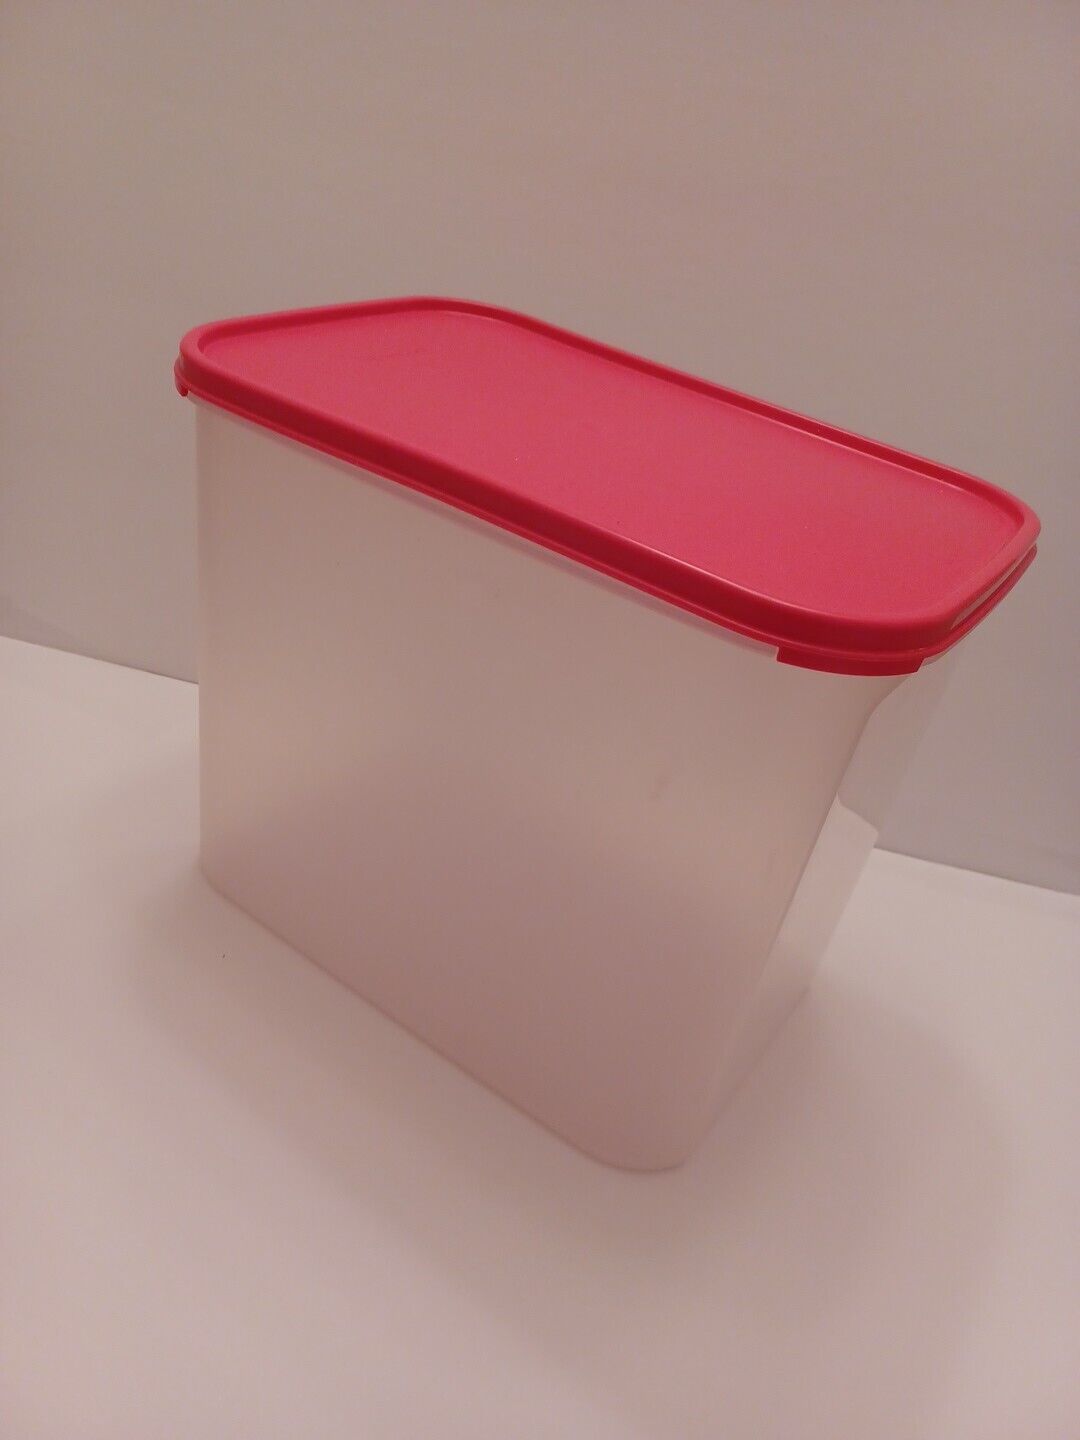 Tupperware Modular Mates Container 37-Cup 8.7-L 2170A-1 W/Red Lid 1610L-4 USED